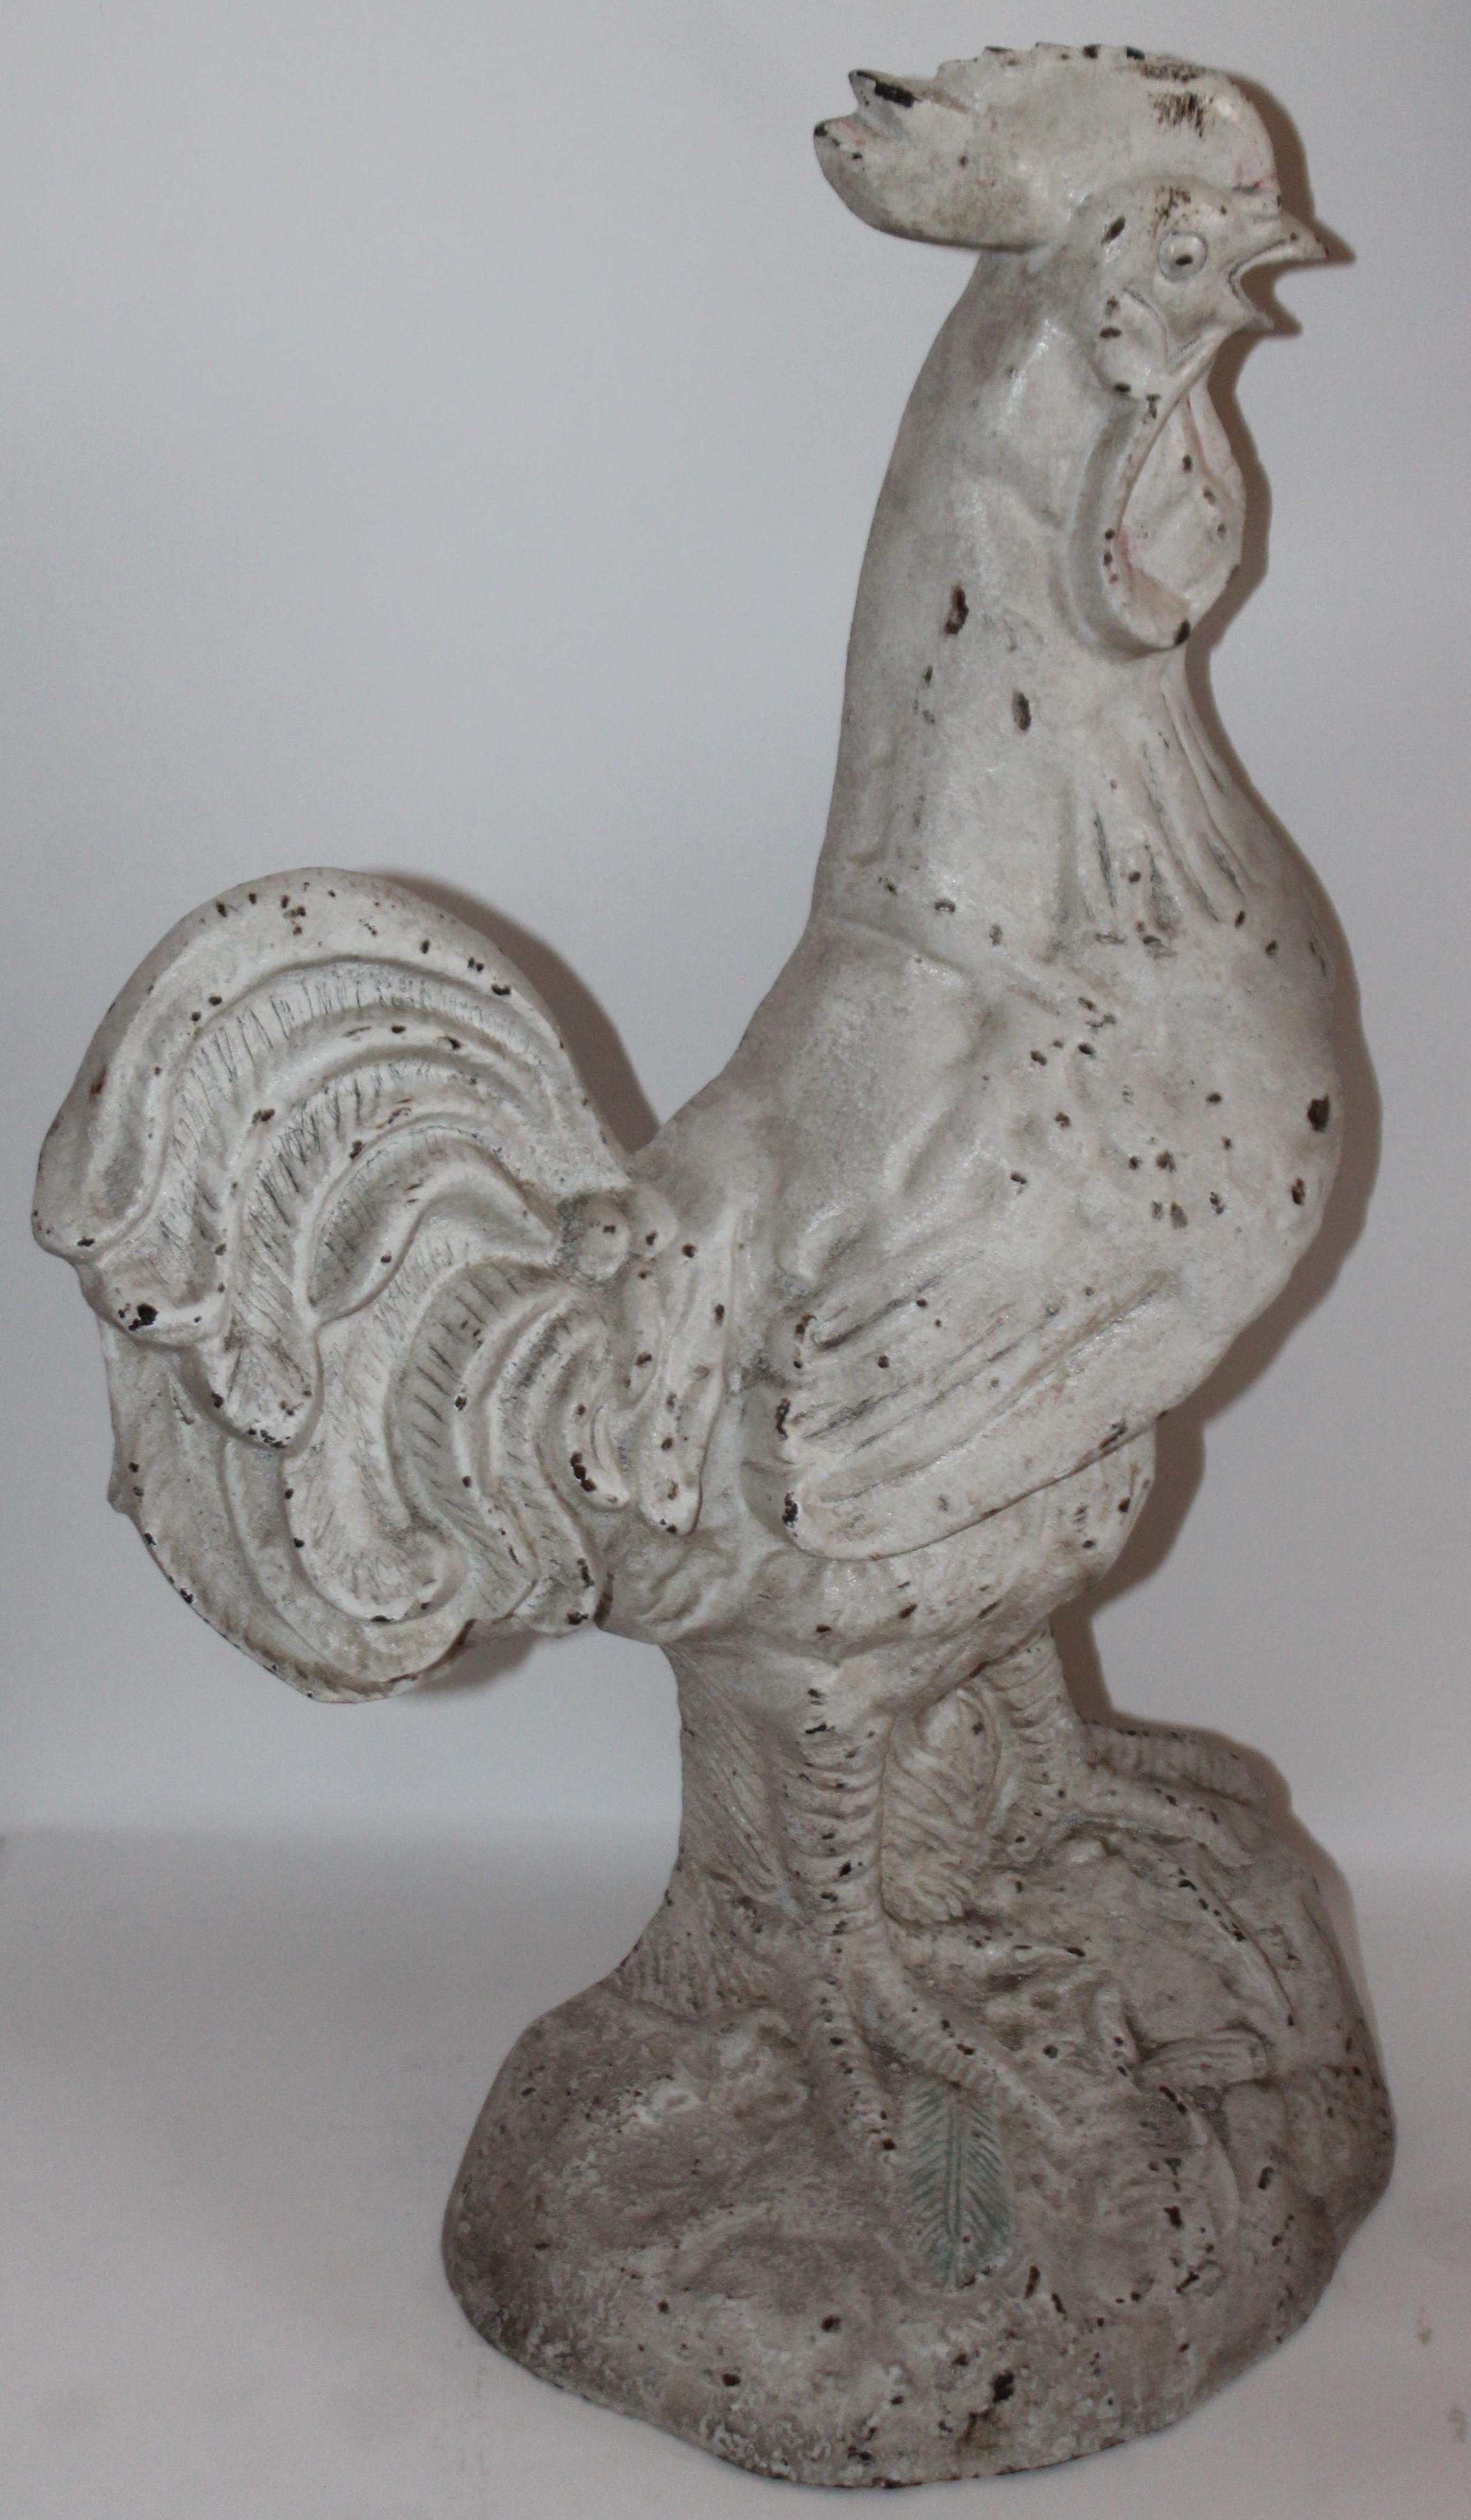 19th century original white painted iron rooster garden ornament or could work as a large oversized door stop. Fantastic form and surface.